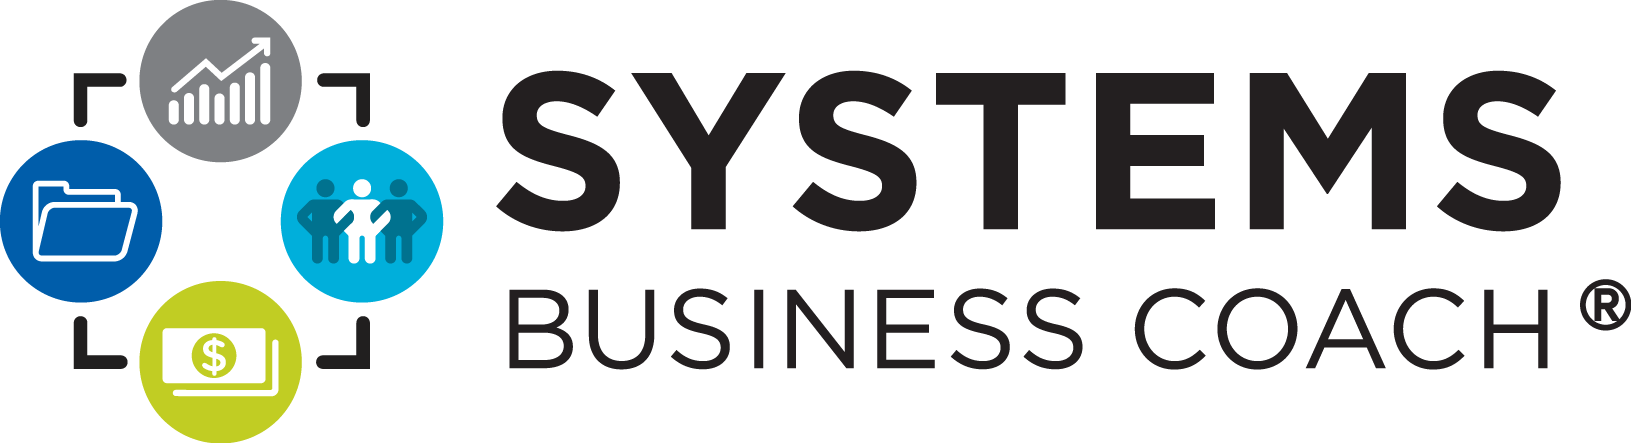 Systems Business Coach ®